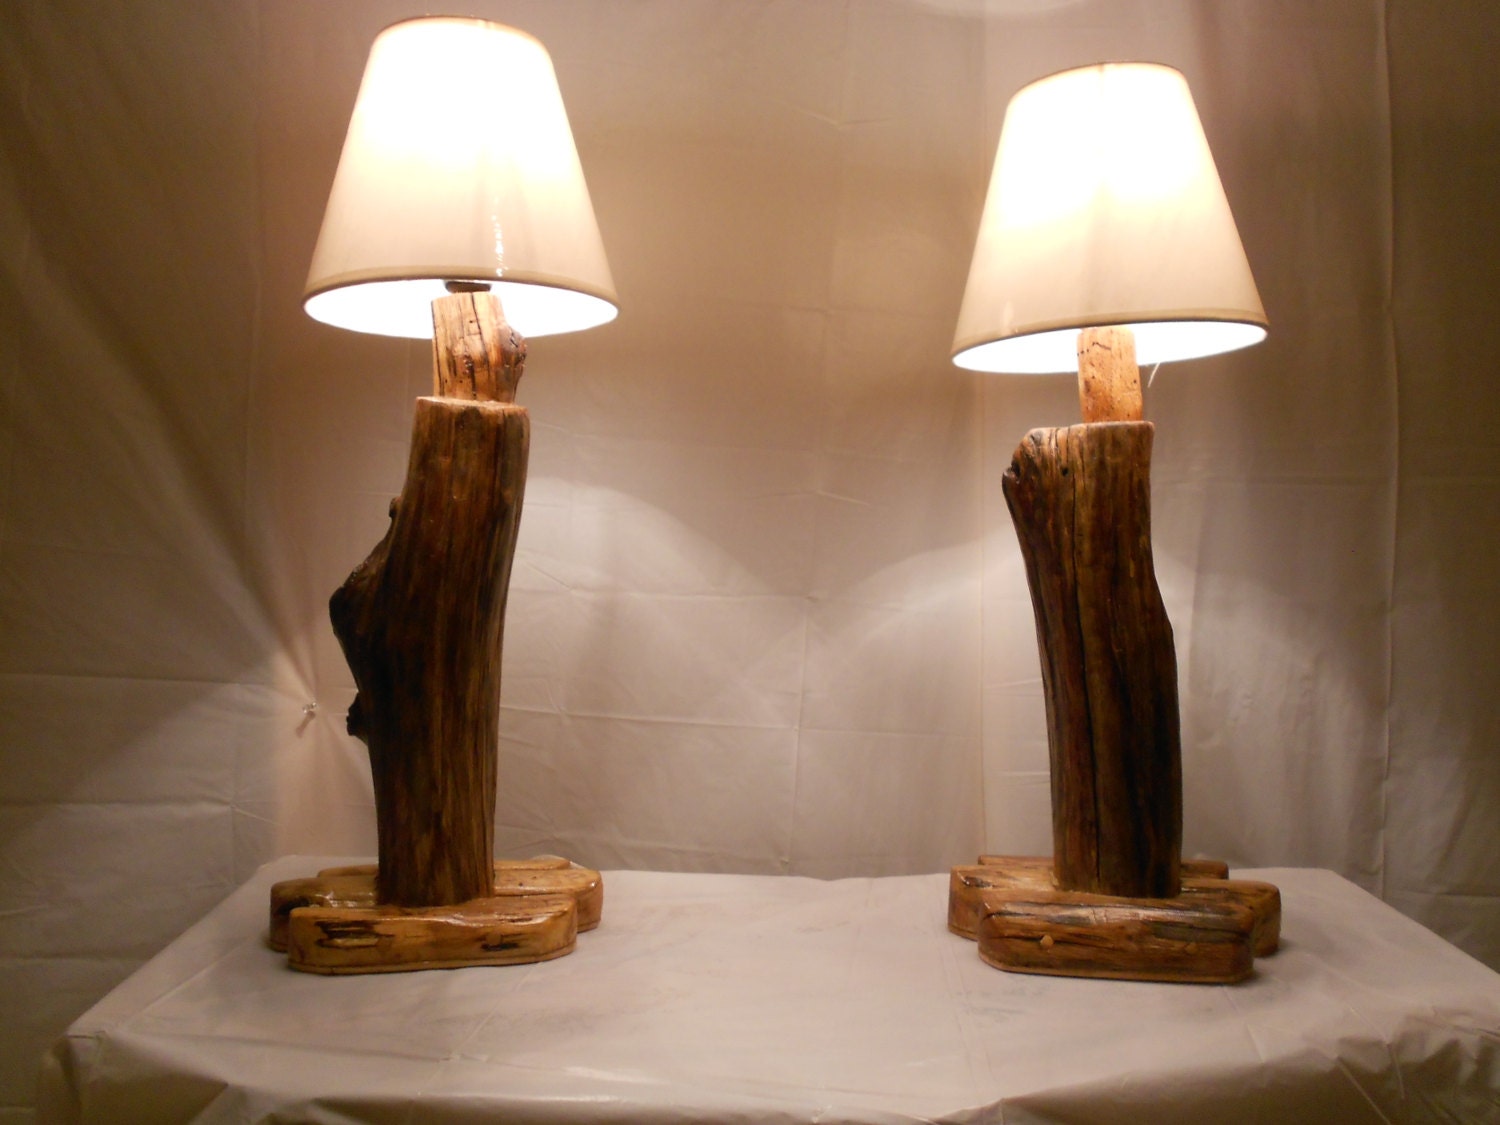 Rustic log lamps by backwoods85 on Etsy